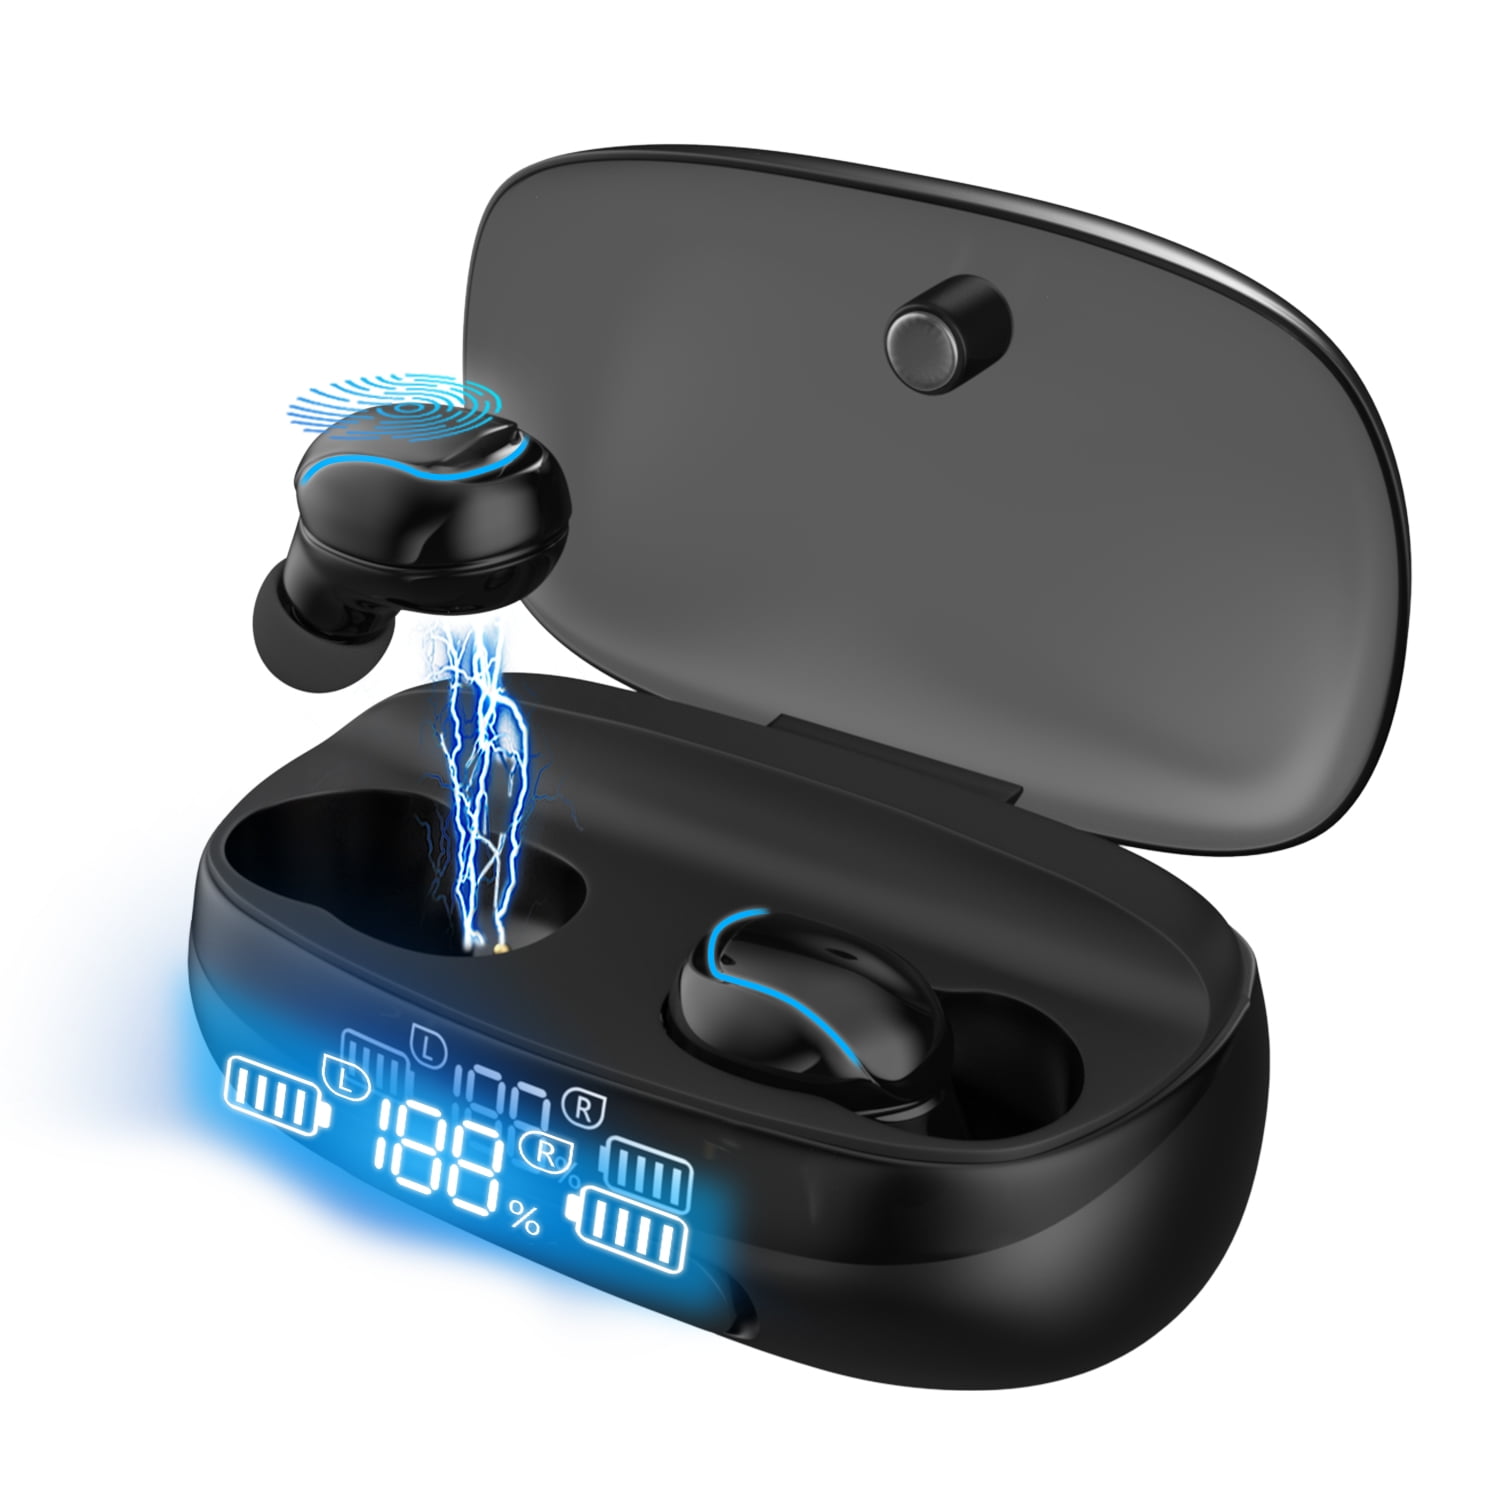 Wireless Earbuds Bluetooth 5.0 Headphones IPX8 Waterproof in-Ear Headphones with Charging Case for Sports 120H Playtime Deep Bass Stereo Sound,Noise-Cancelling Earbuds with Microphone 